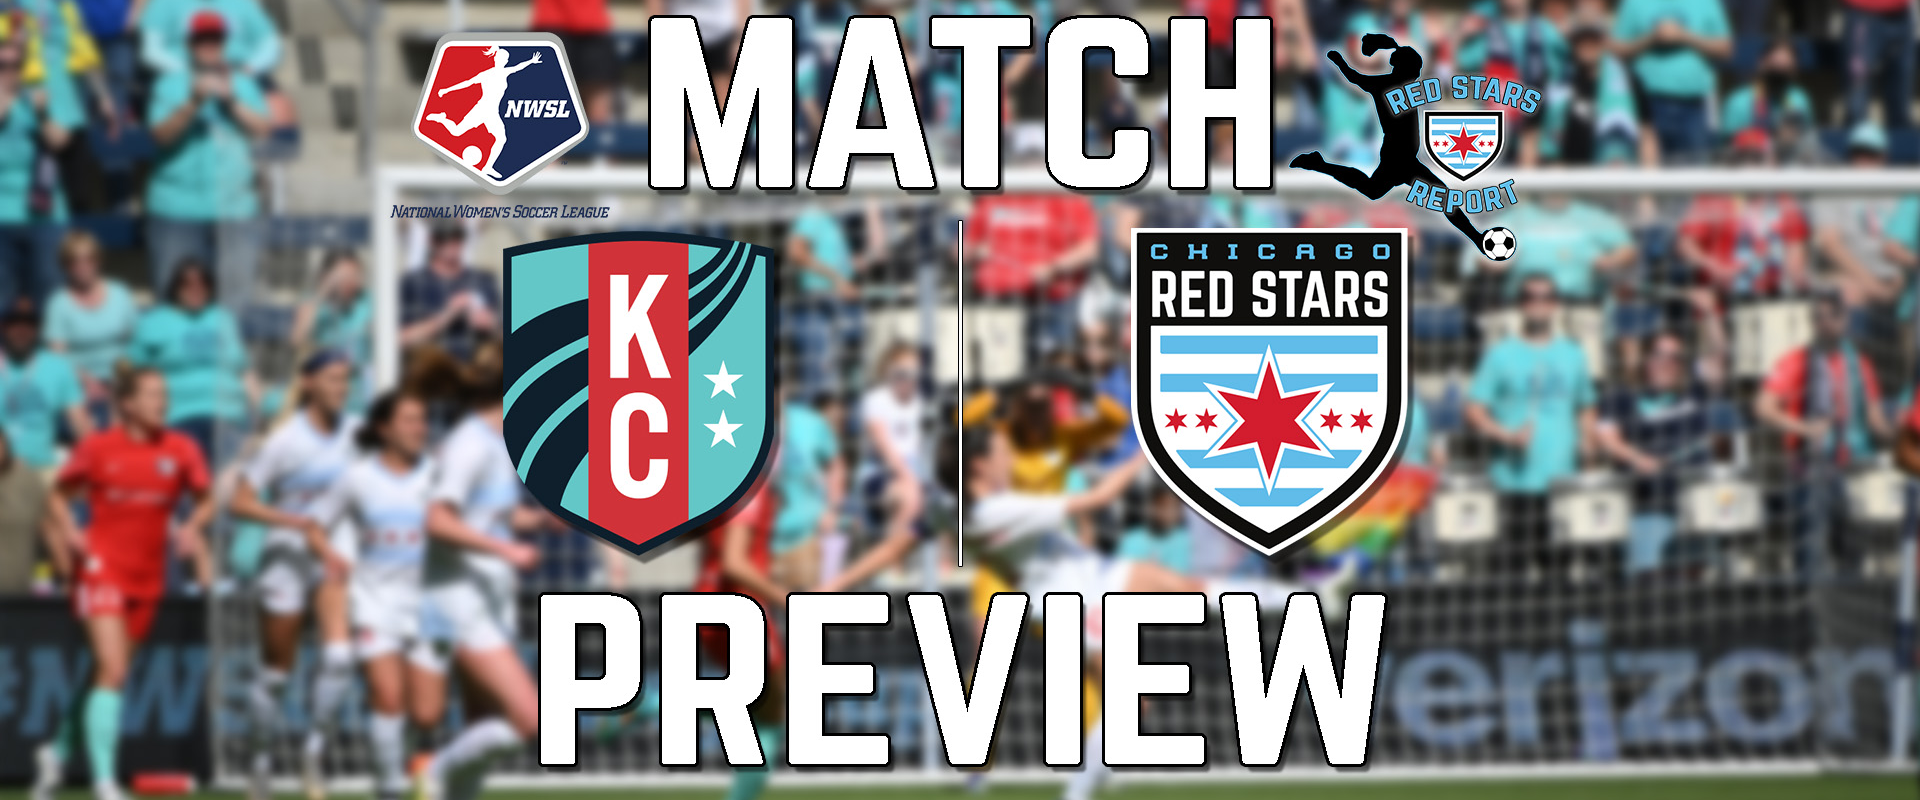 Red Stars Look To Continue Their Streak of Six Matches Unbeaten As They Take On The KC Current